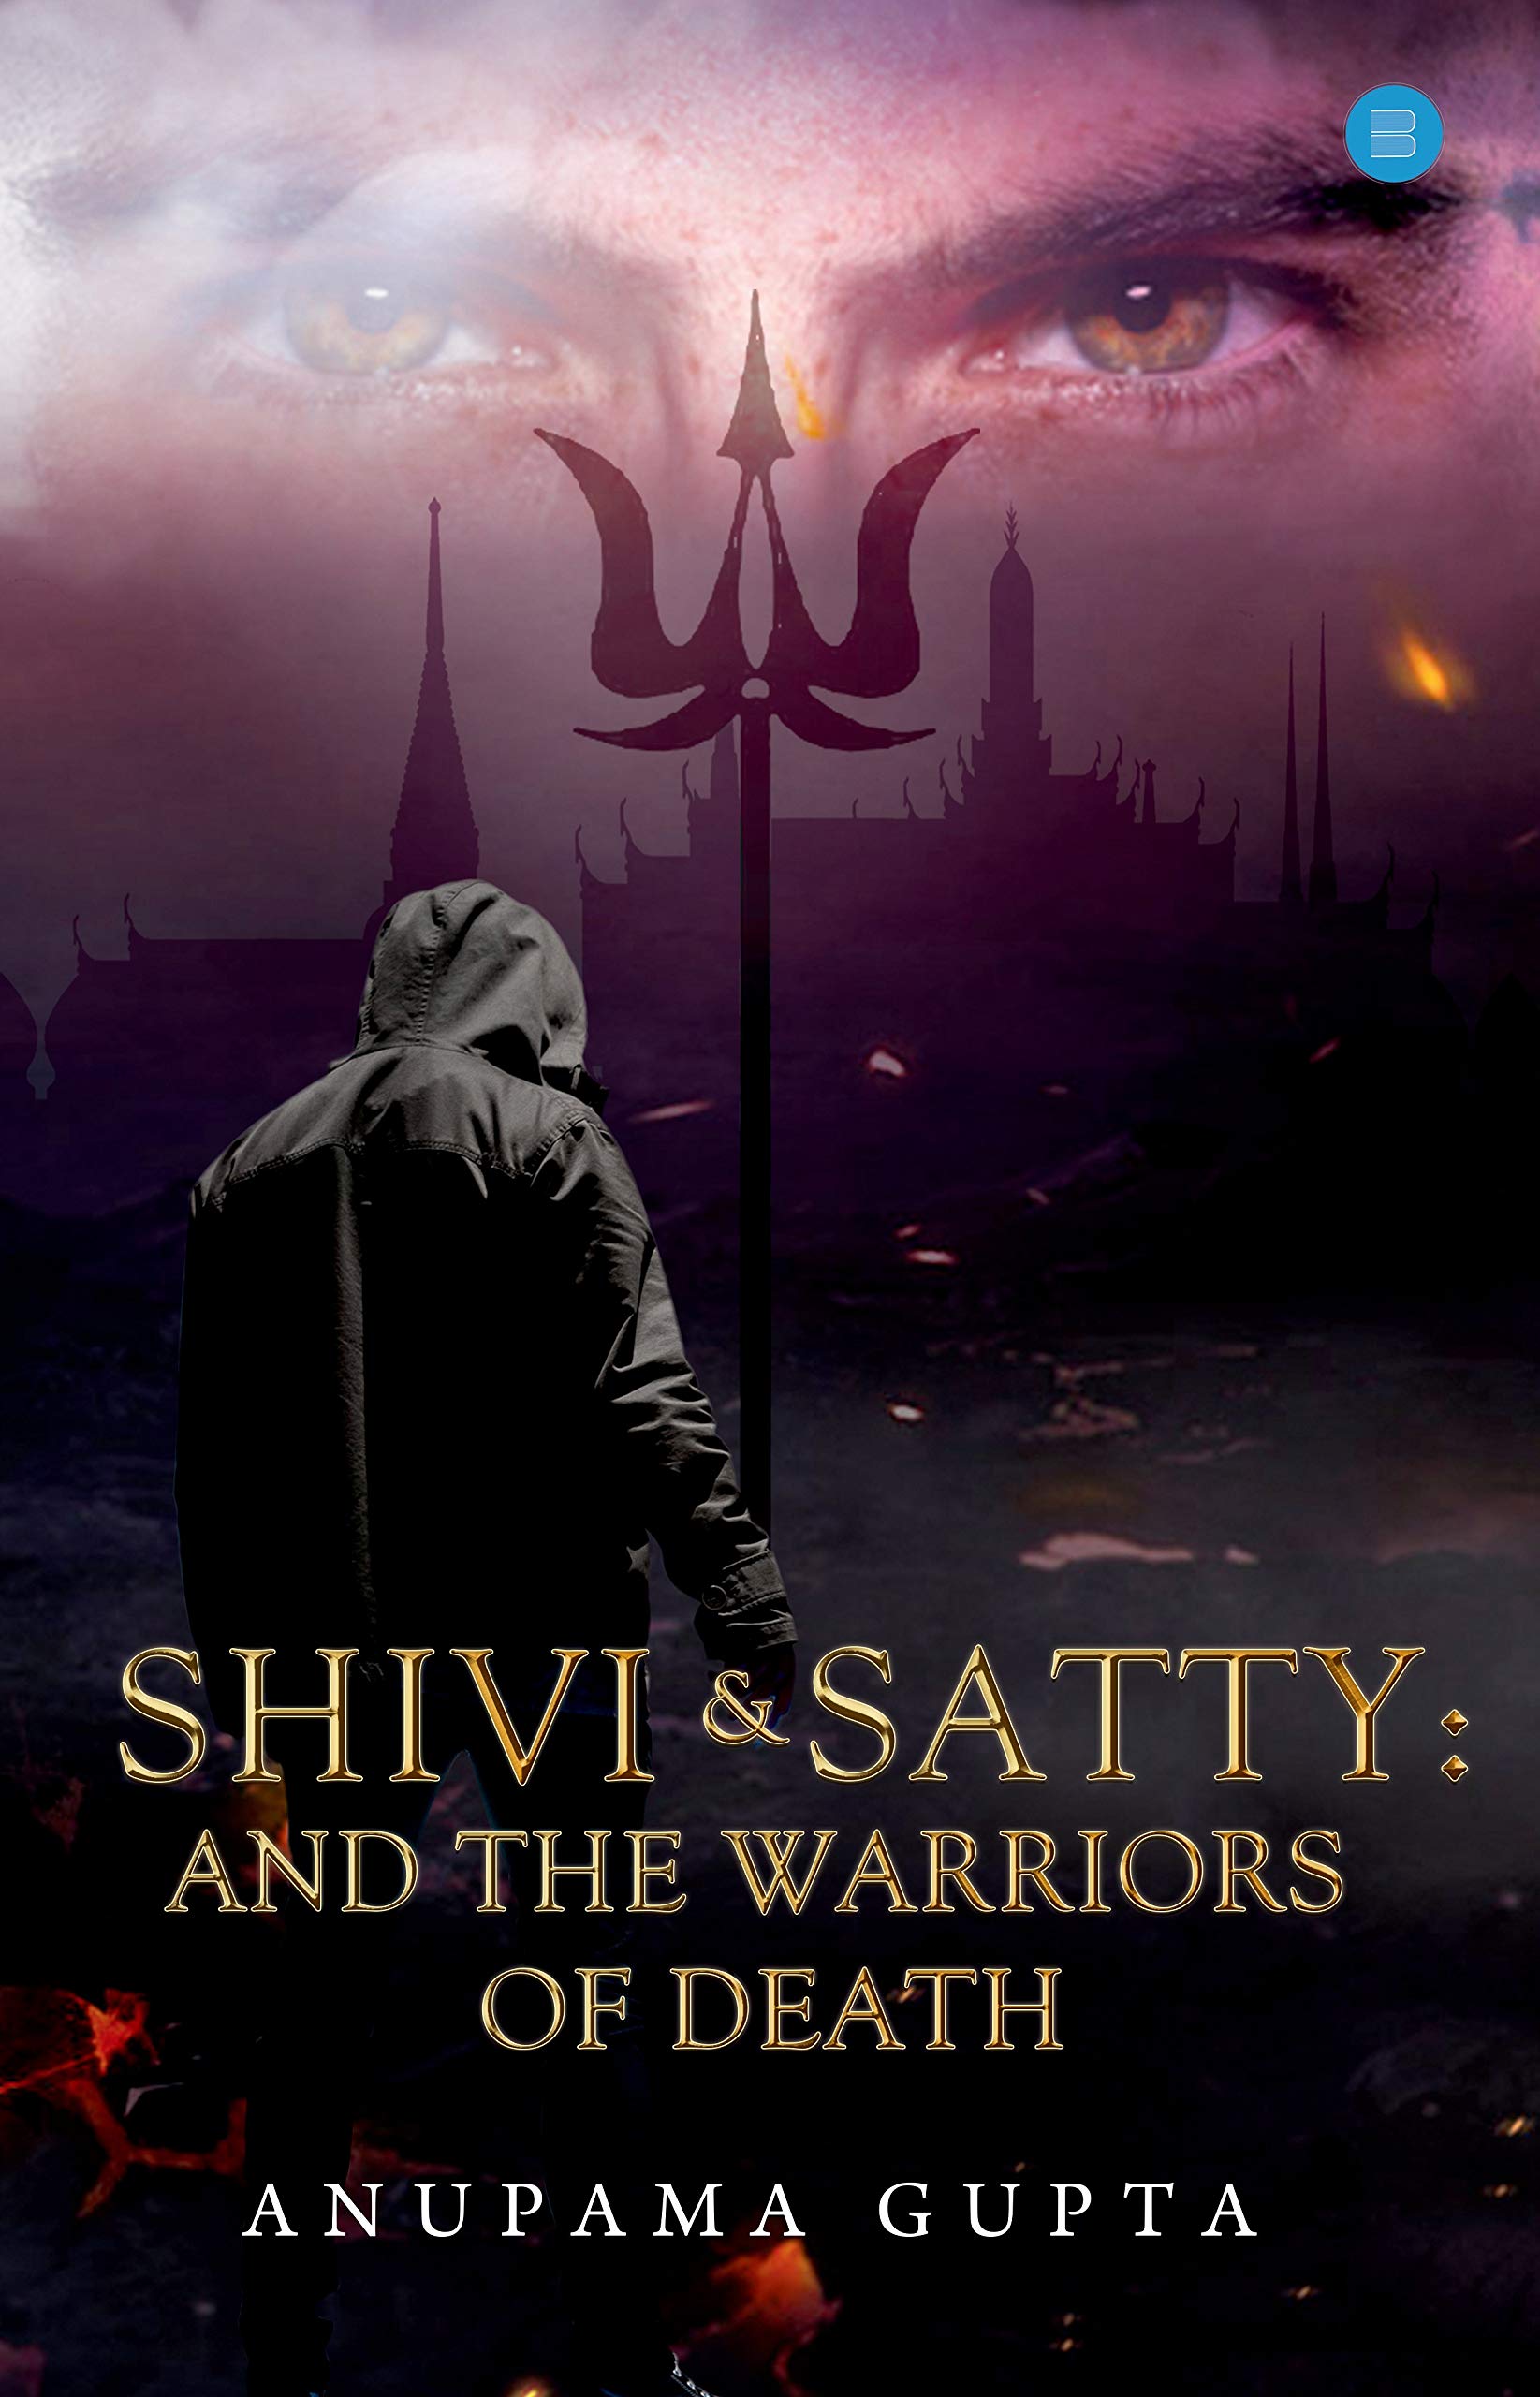 FREE: SHIVI & SATTY: AND THE WARRIORS OF DEATH by Anupama Gupta